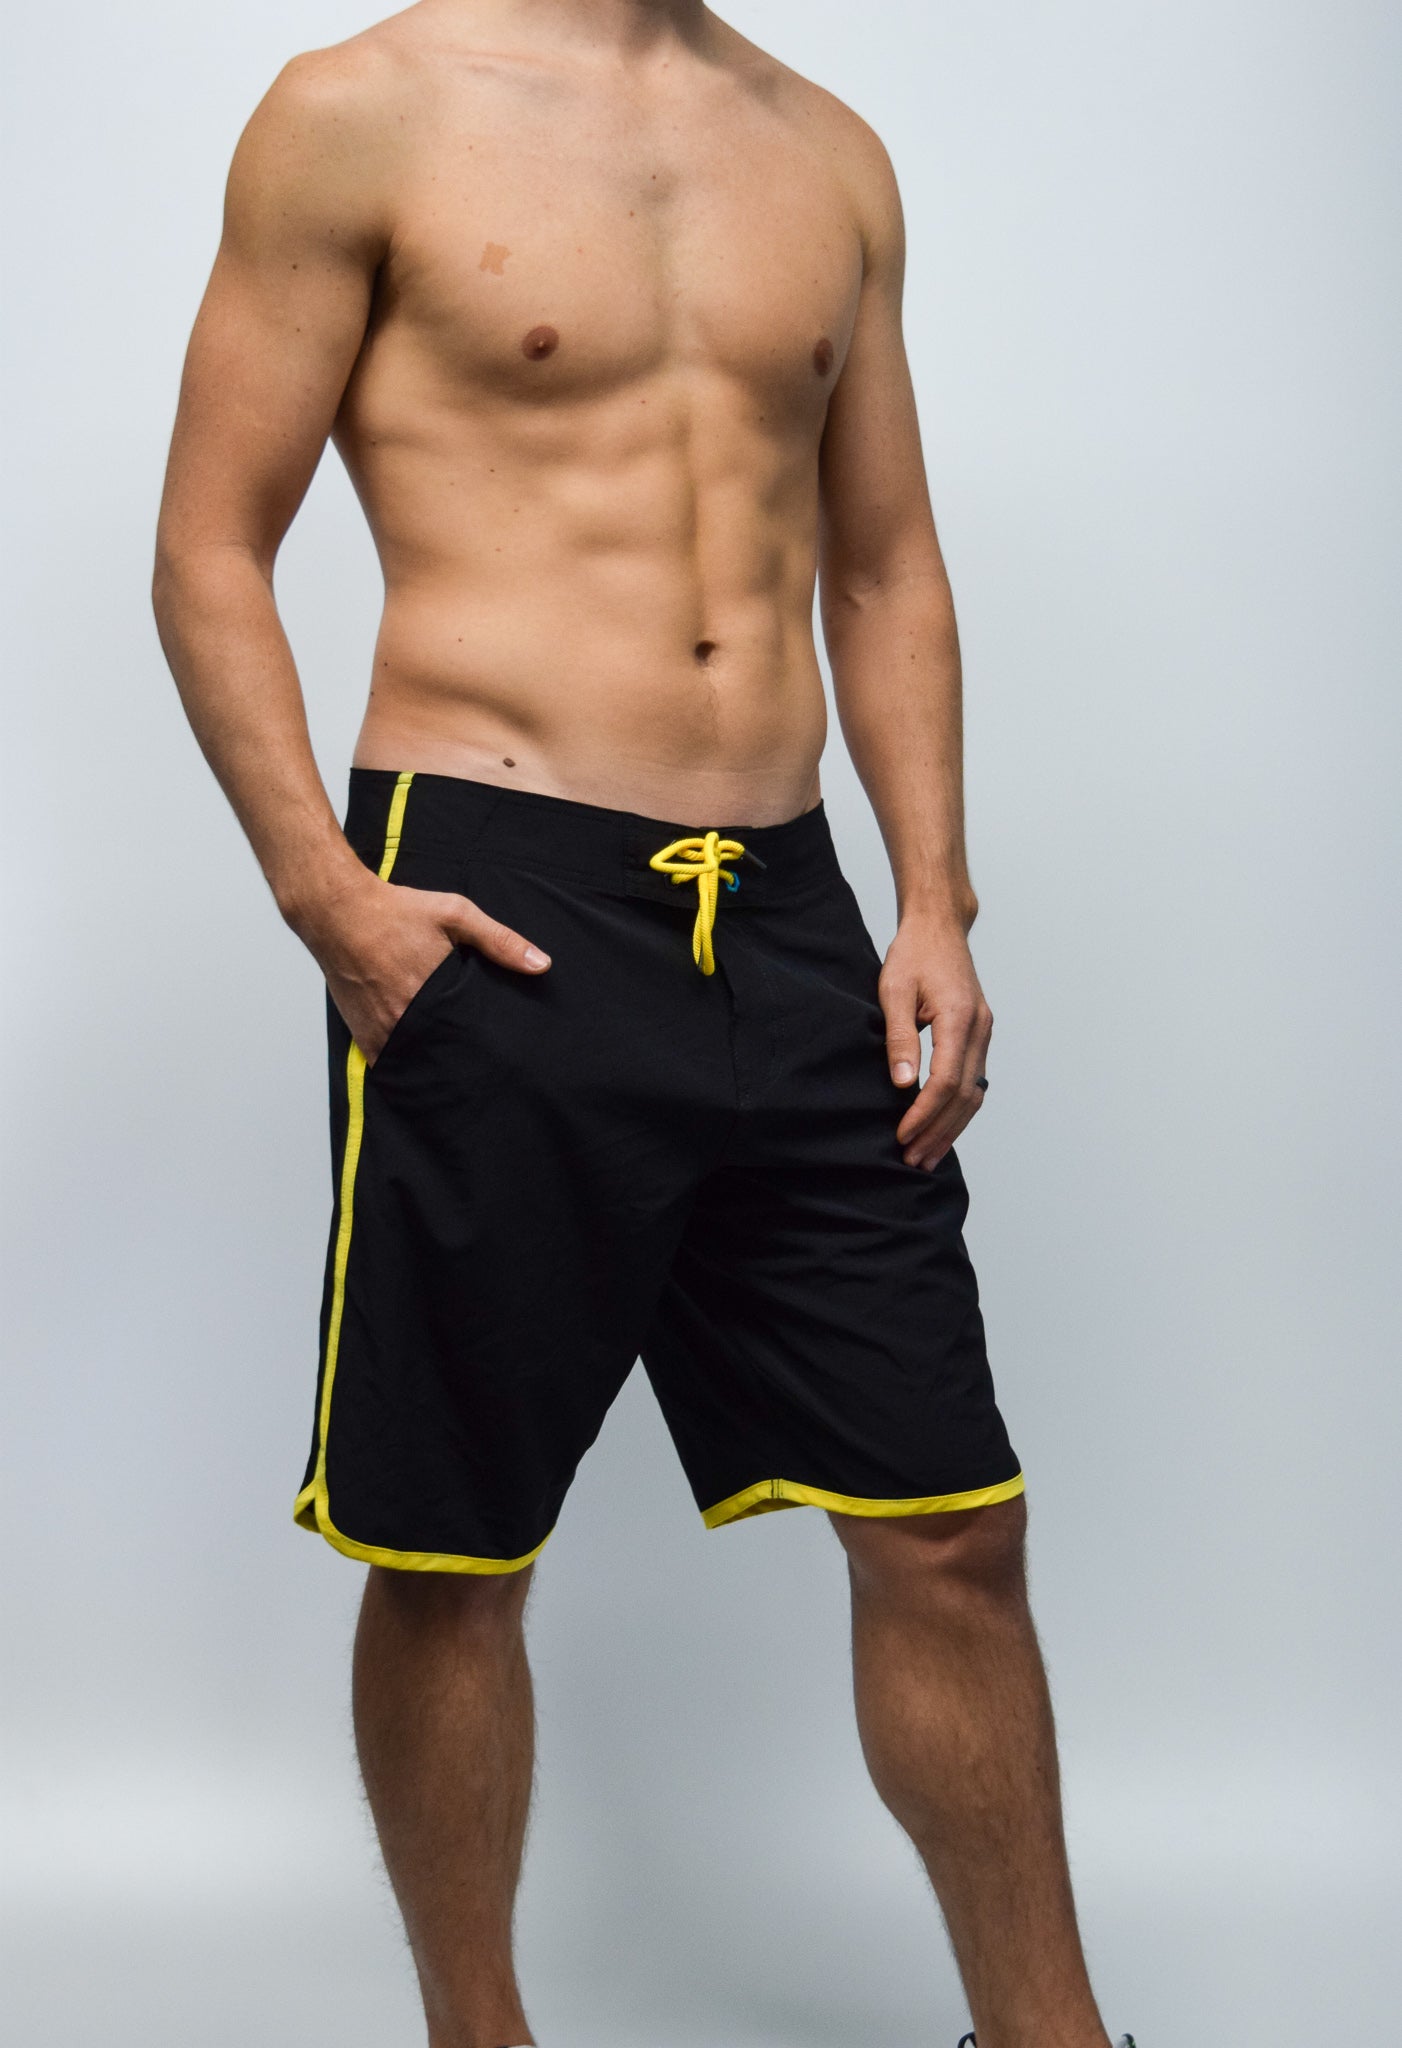 Men’s Competition Hybrid Shorts in Yellow